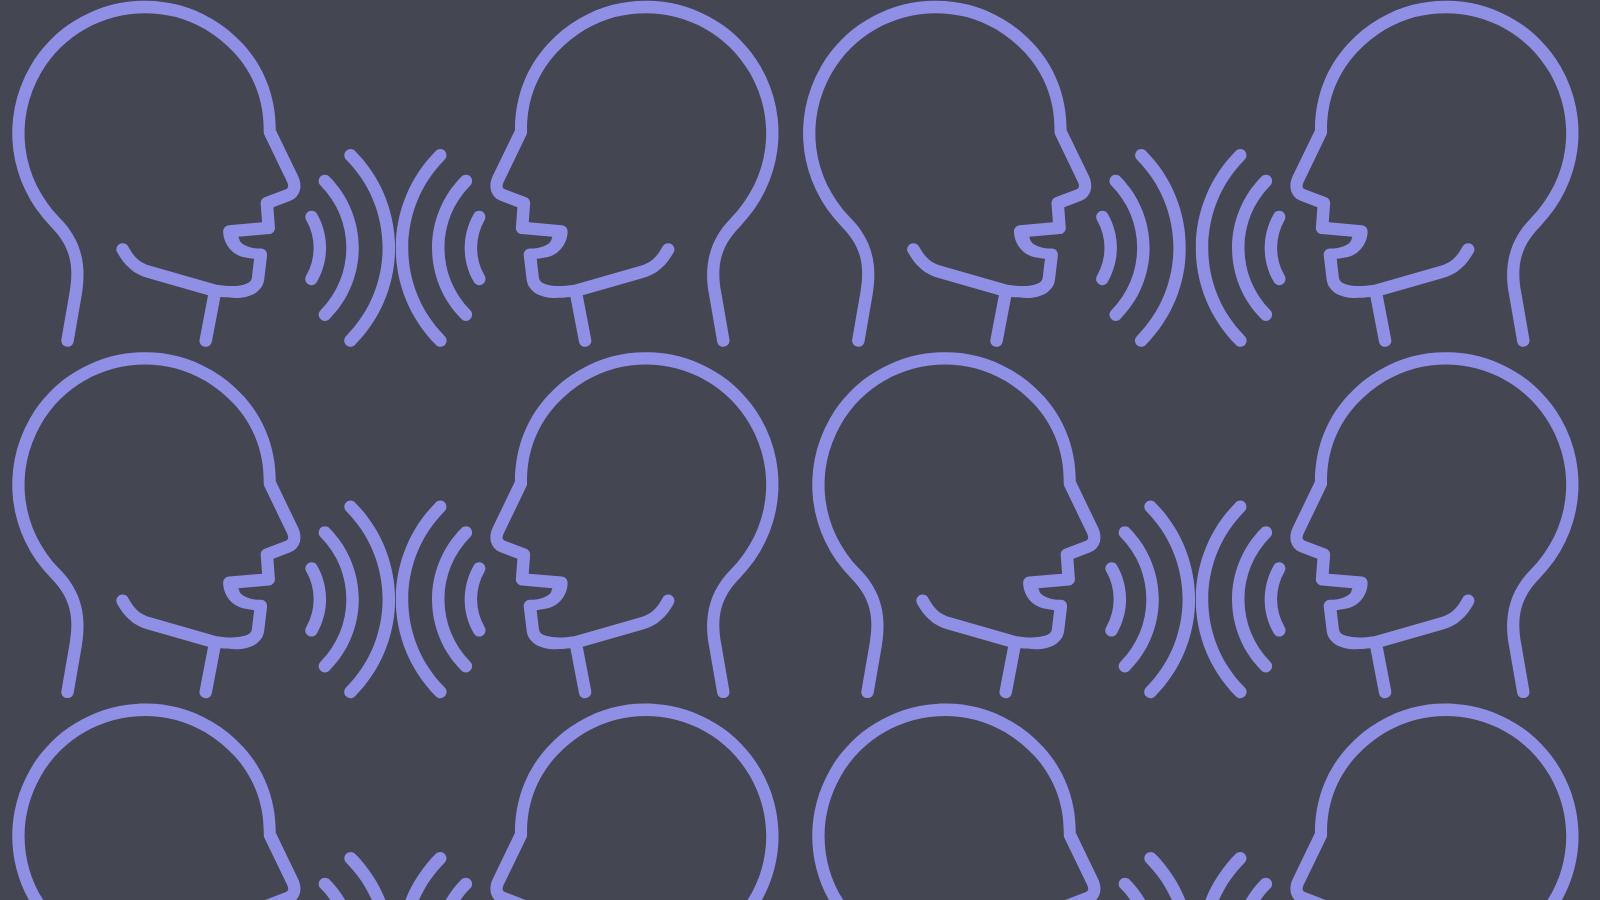 Minimalist graphics of a person speaking